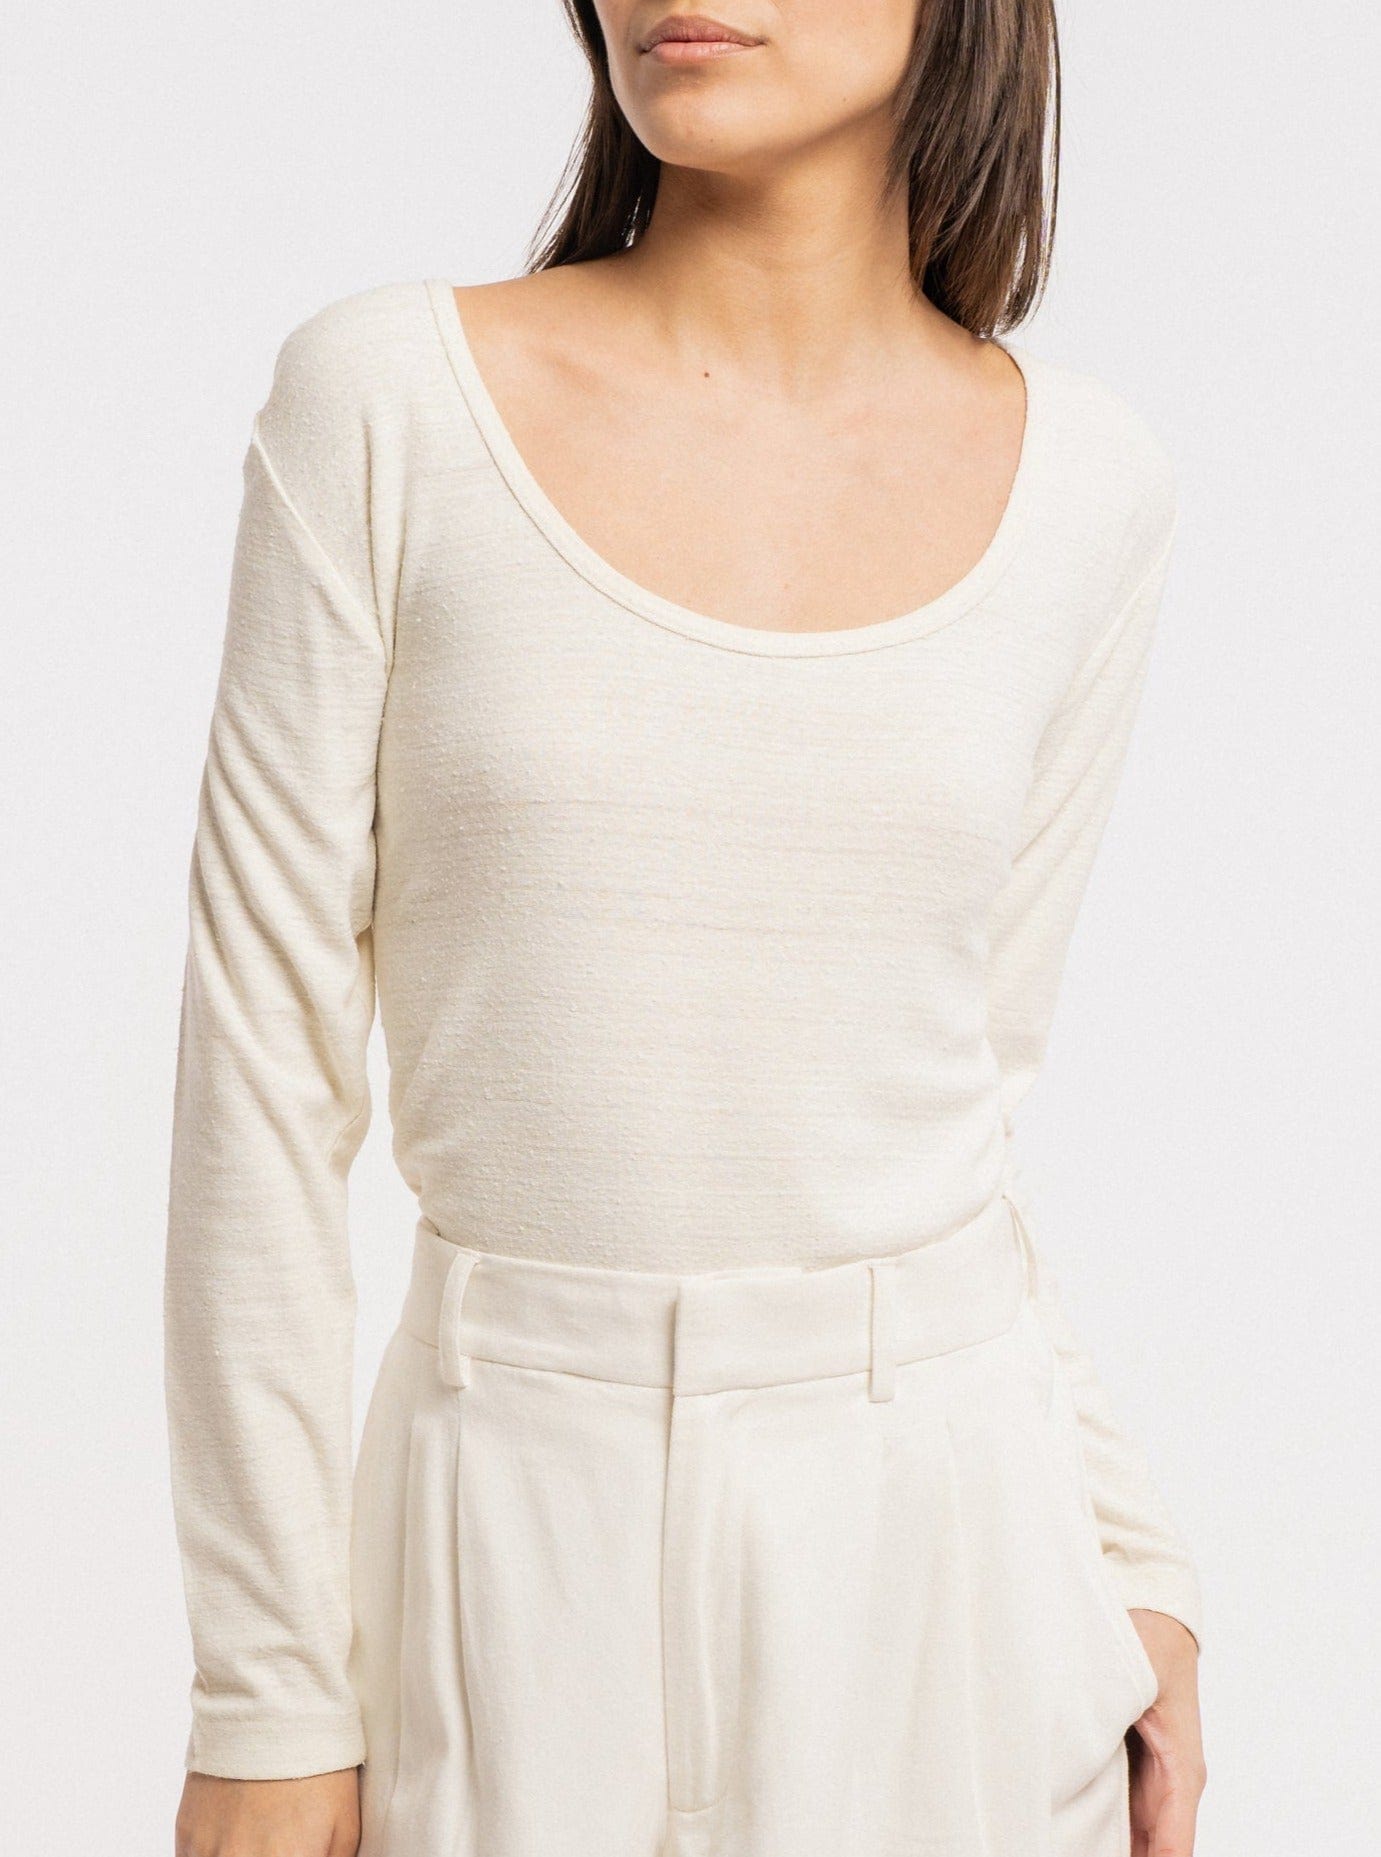 The model is wearing a white long-sleeved Scoop Neck Tee - Ivory made of silk noil, showcasing sustainability.